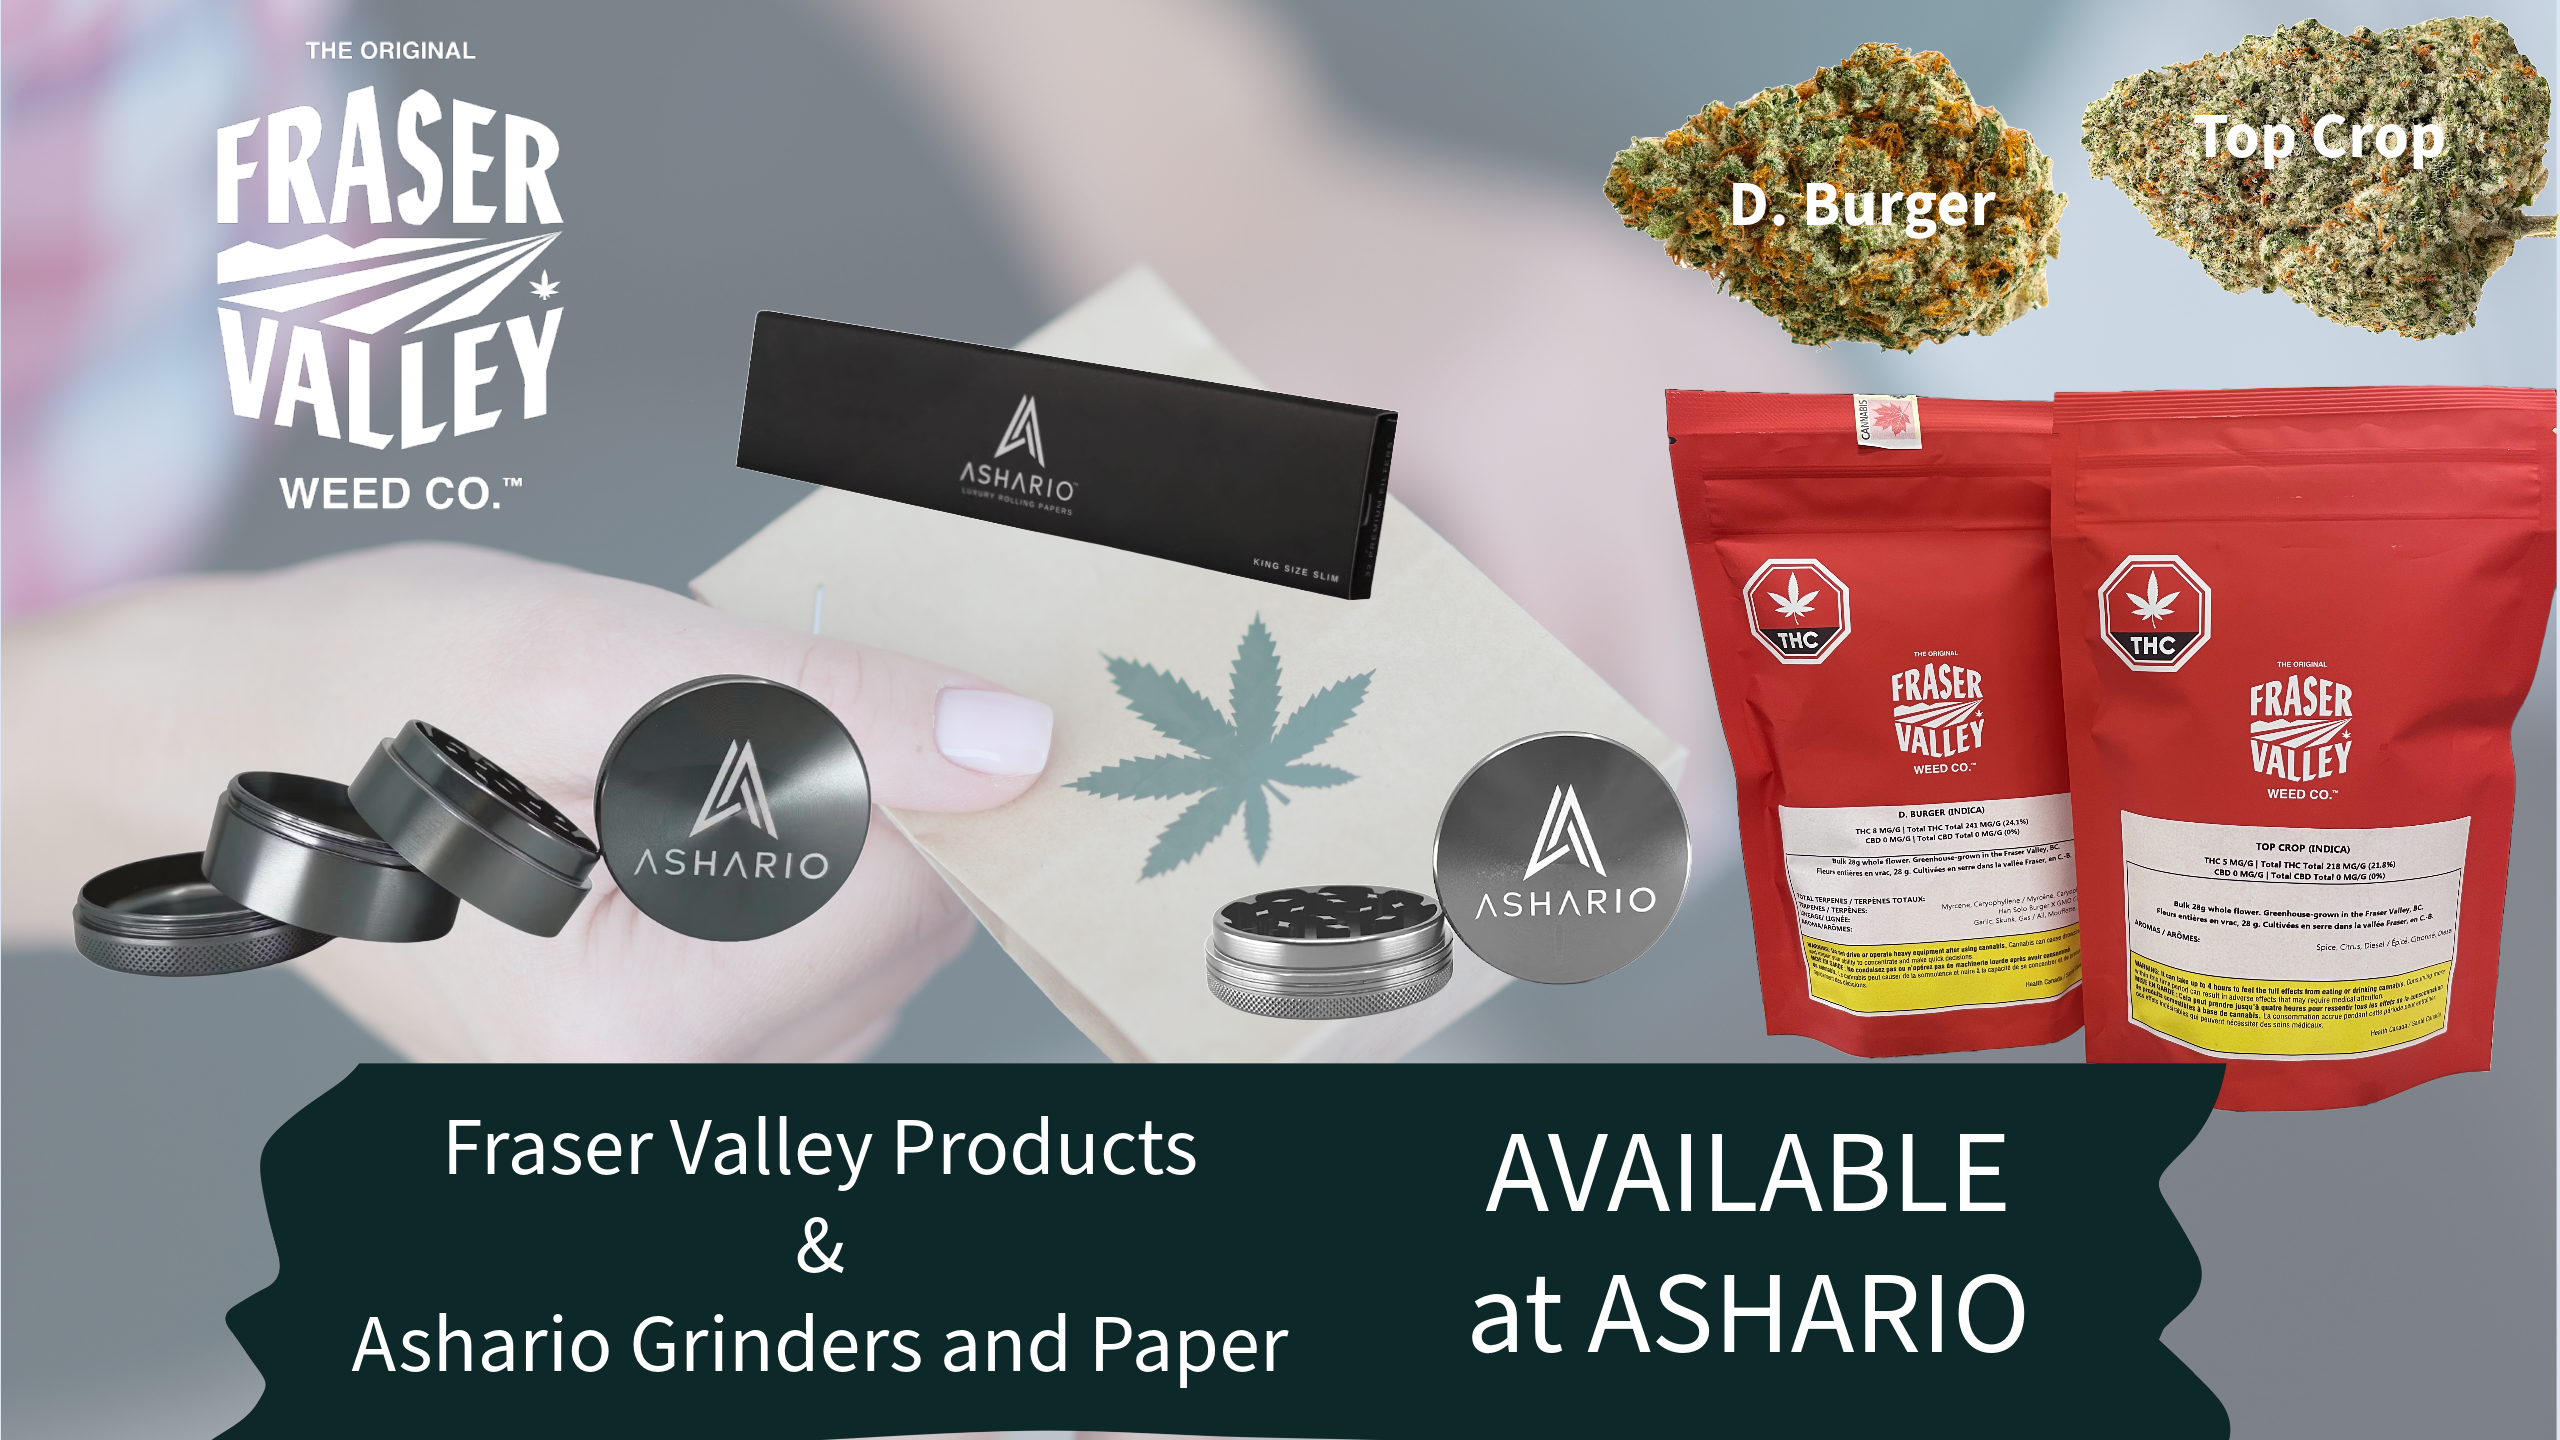 Step into the world of artisanal cannabis with The Original Fraser Valley Weed Co, a beacon of quality and tradition, now available at Ashario Cannabis.